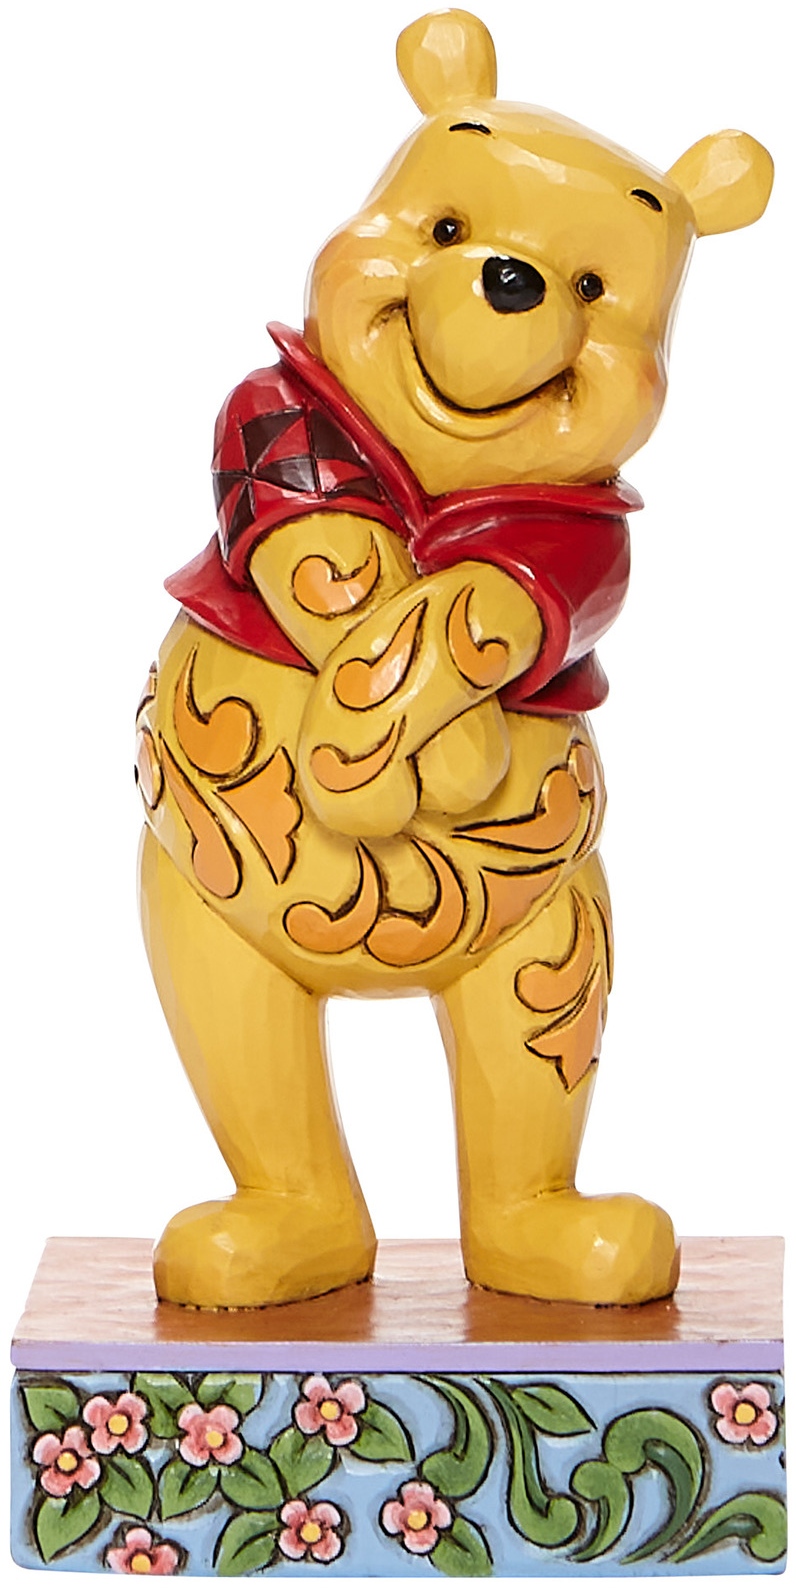 Disney Traditions by Jim Shore 6008081 Pooh Standing Personality Figurine